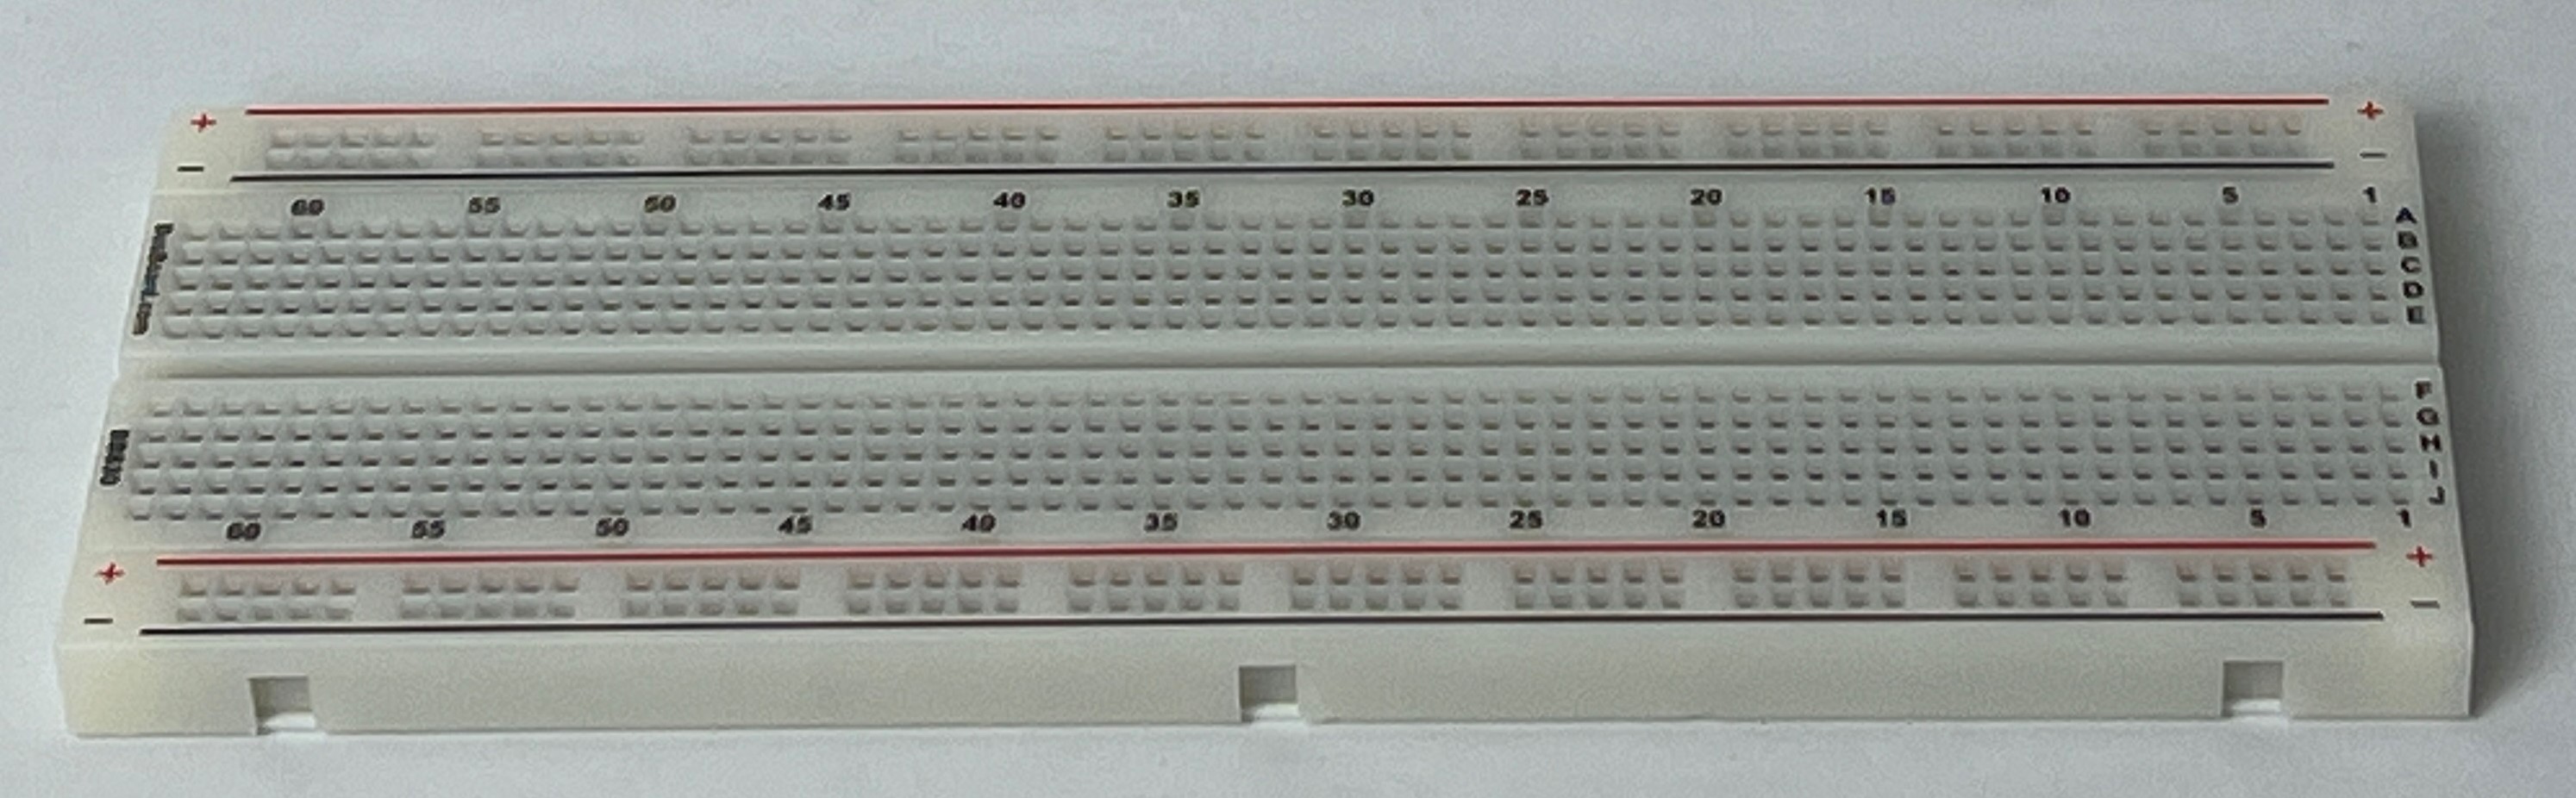 Picture of a breadboard